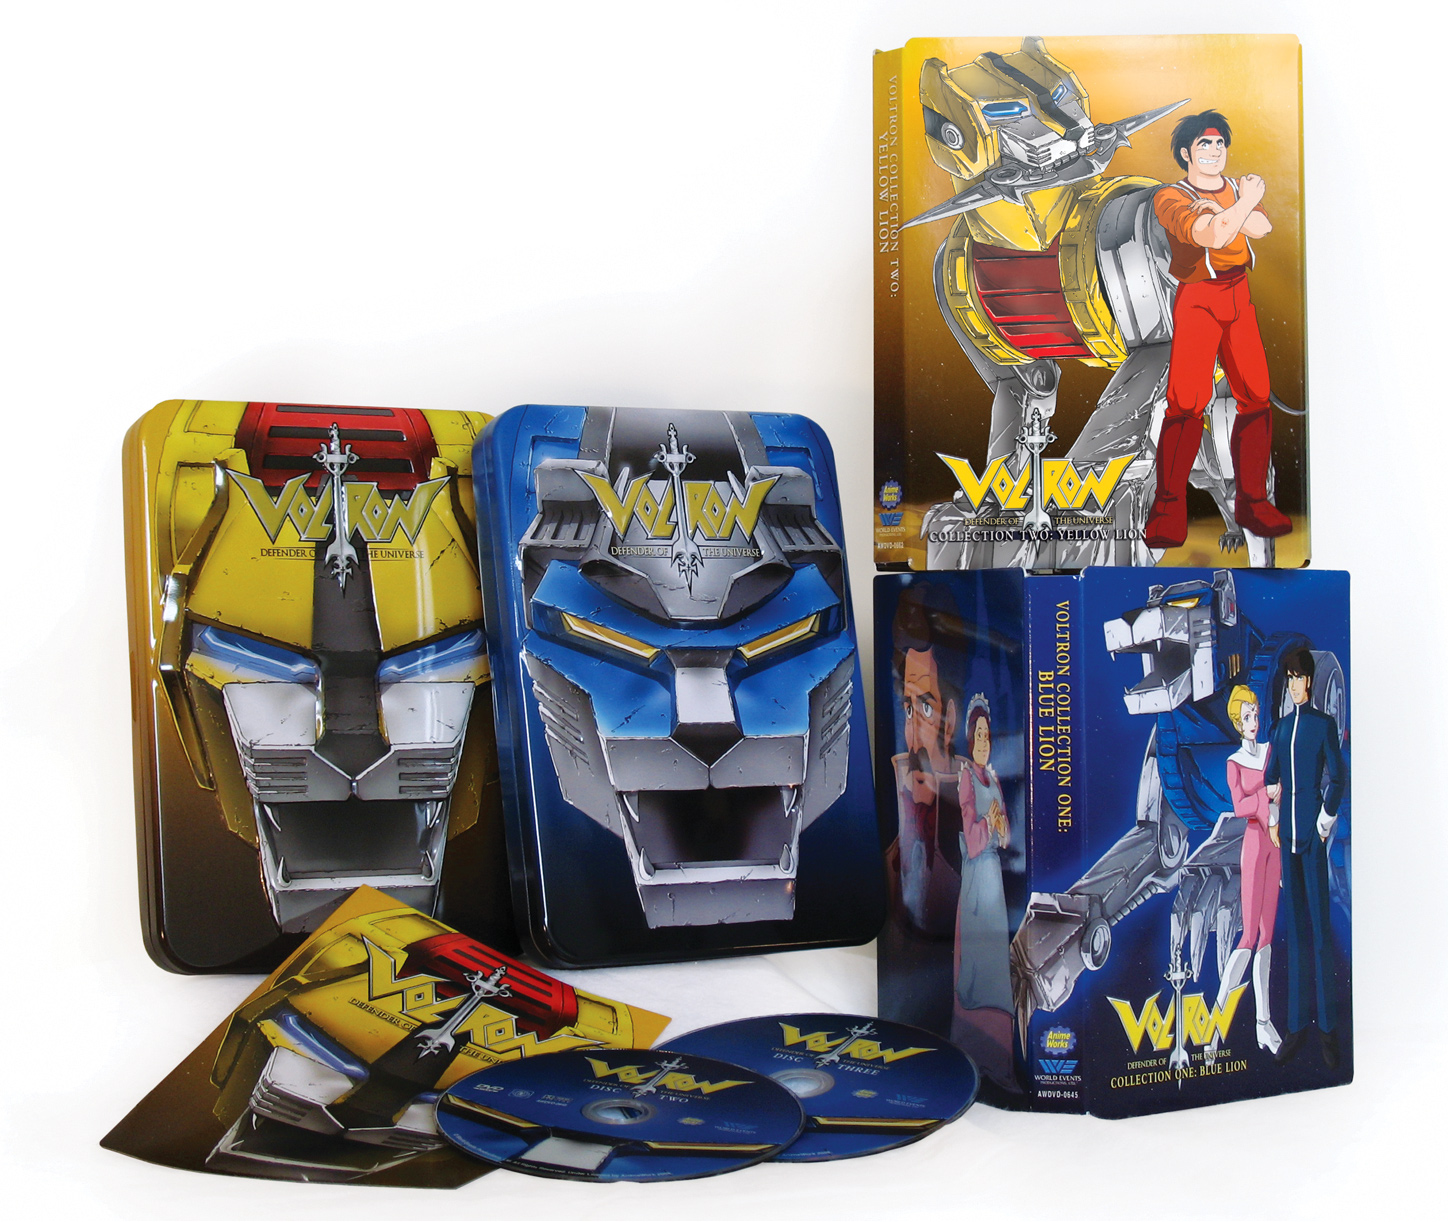 Voltron tins with Digi pack